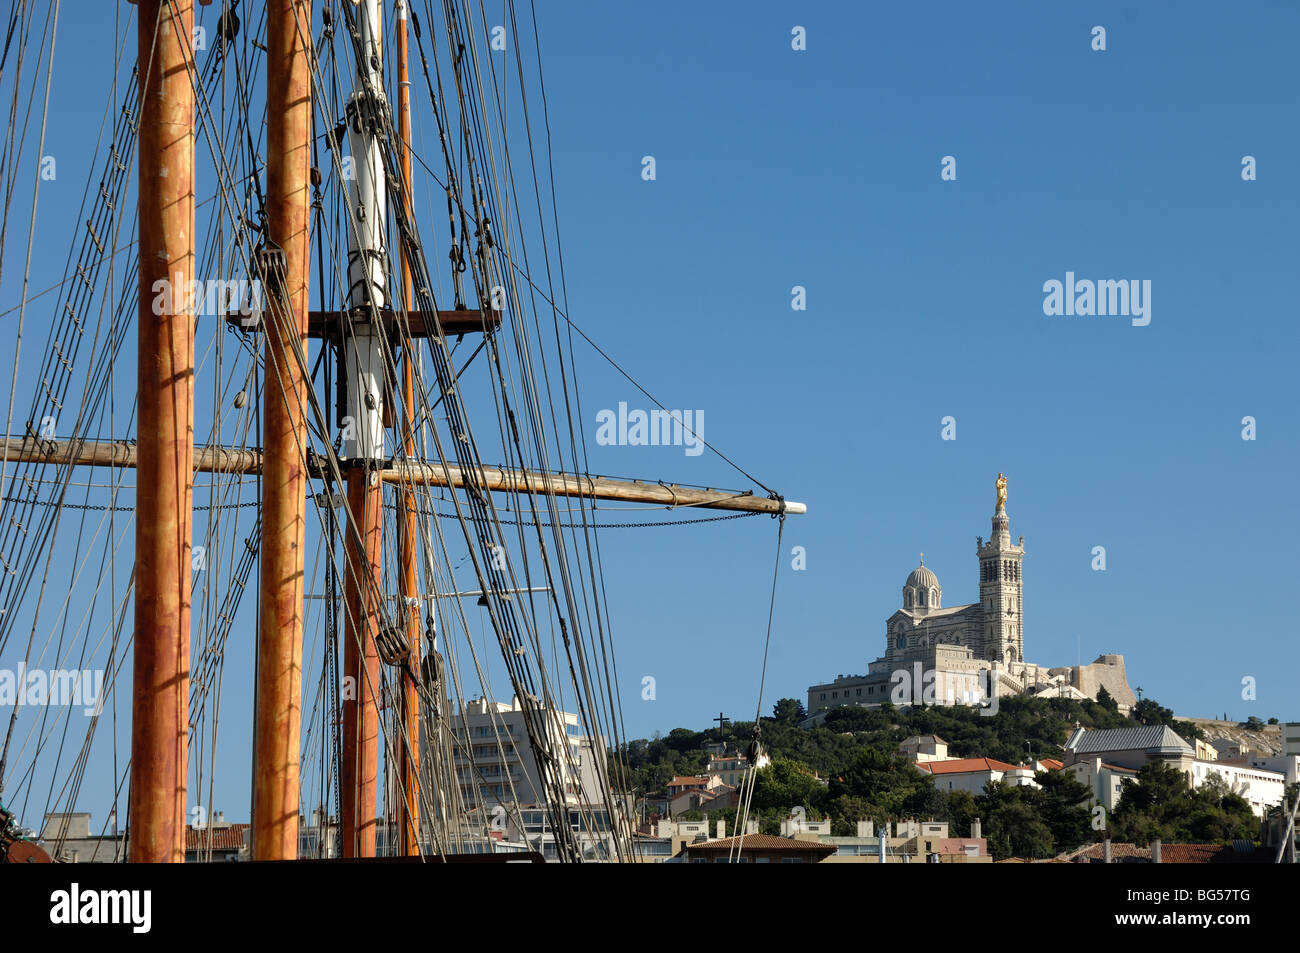 Wooden Masts & Rigging of Yachts in Old Port & Notre-Dame de la Garde Church, Marseille or Marseilles, Provence, France Stock Photo